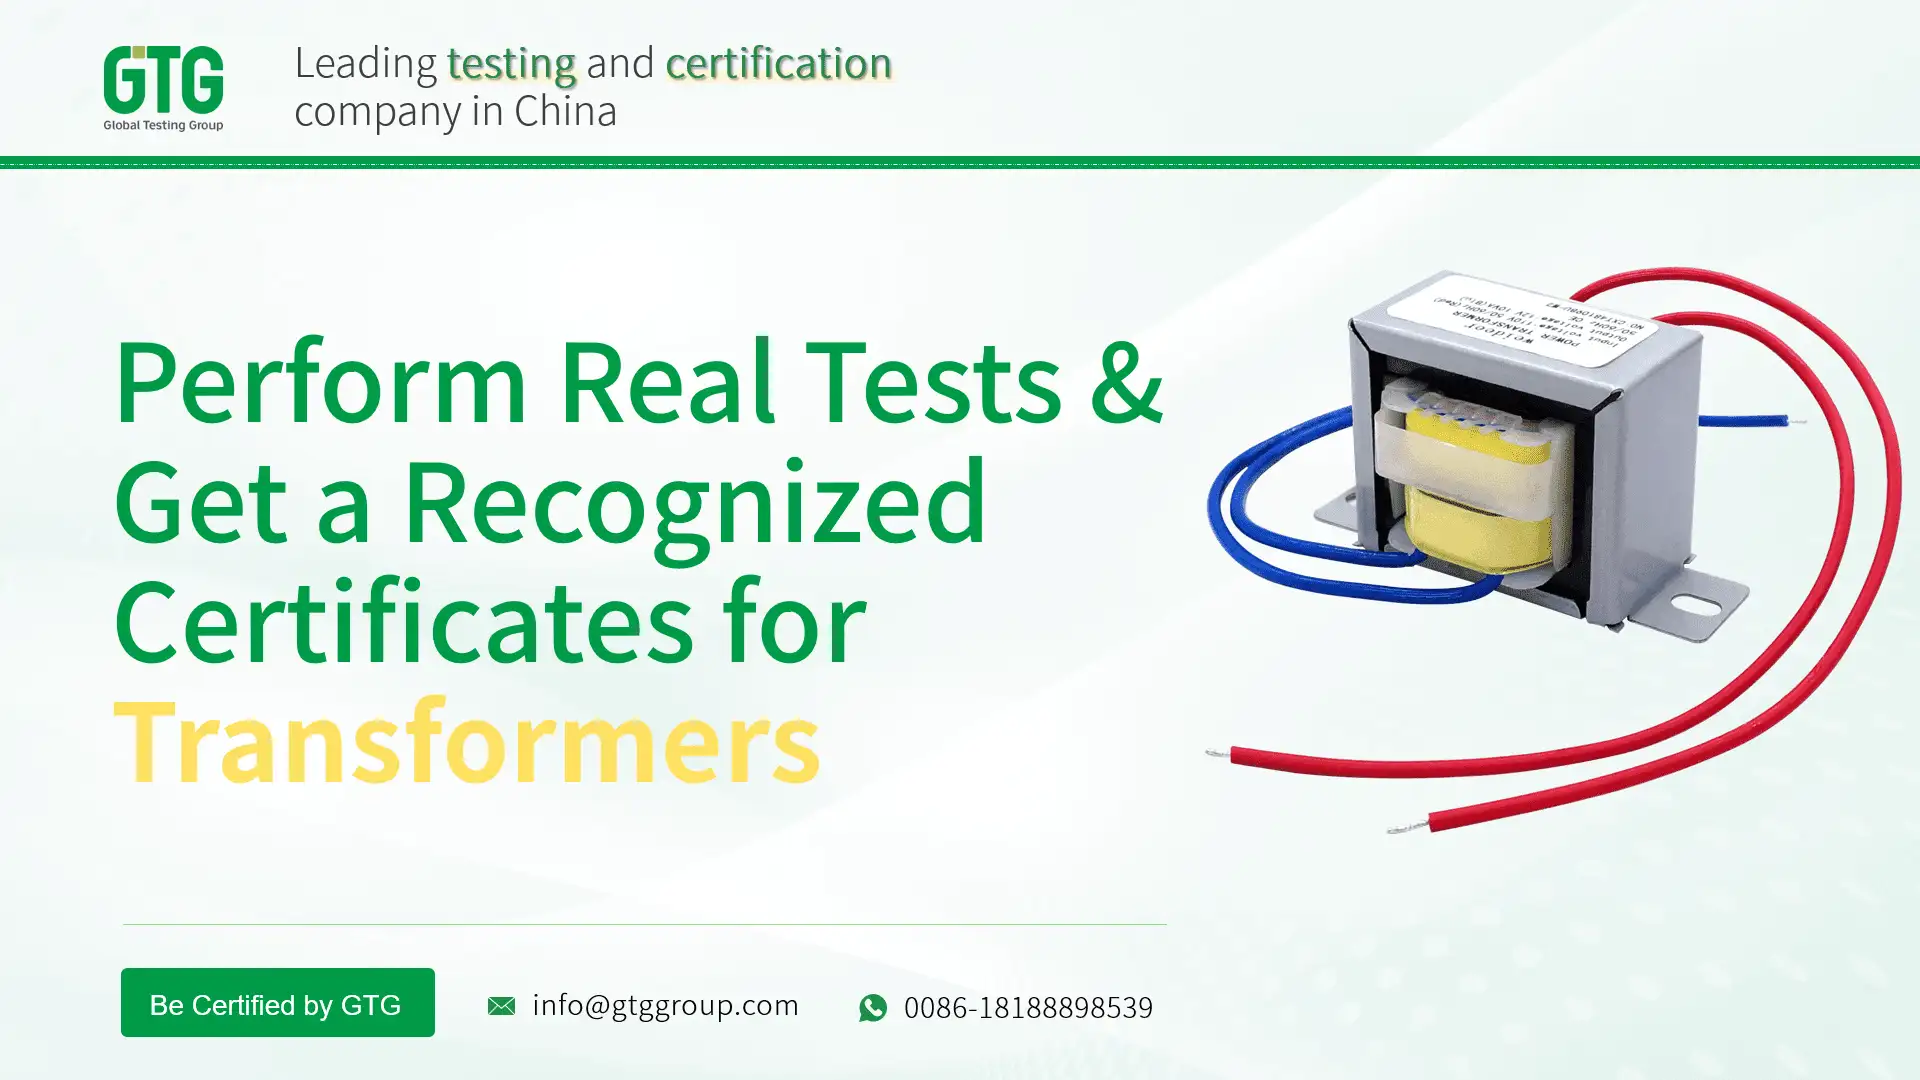 Get Test Report and Certifications for Transformers from GTG Group